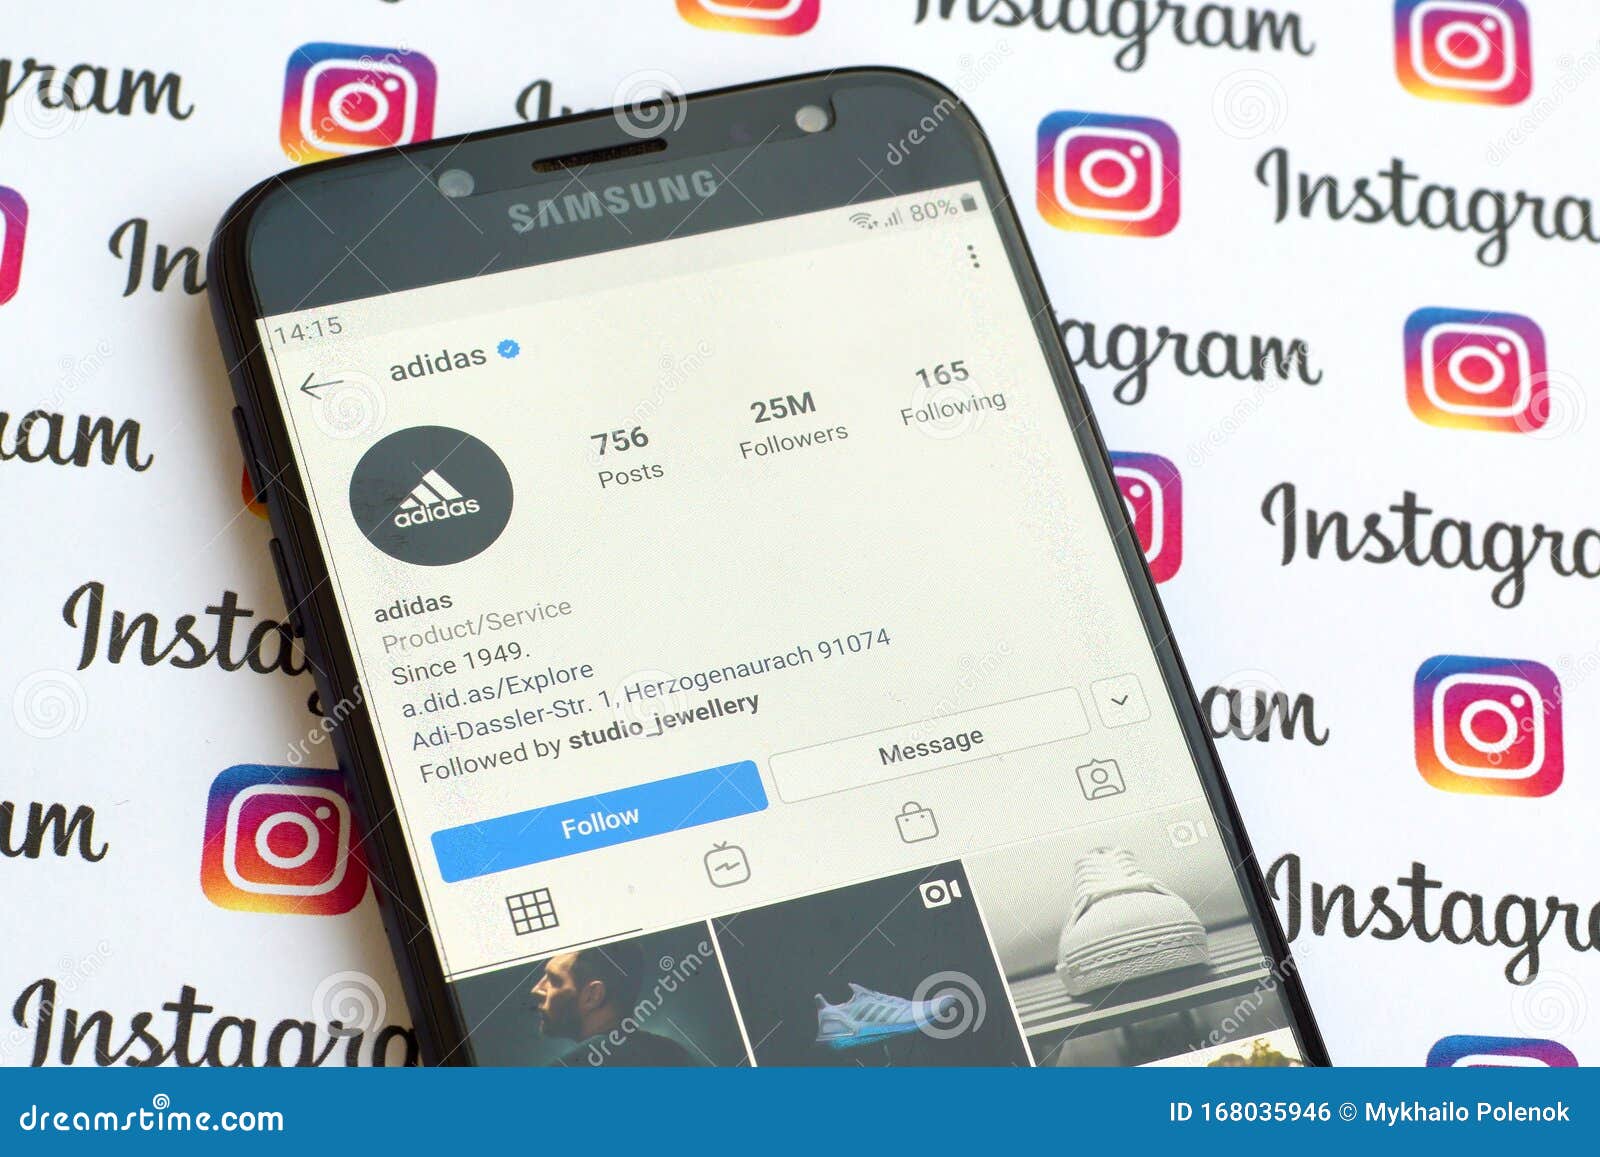 Adidas Official Instagram Account on Smartphone Screen on Paper Instagram  Banner Editorial Photo - Image of like, brand: 168035946